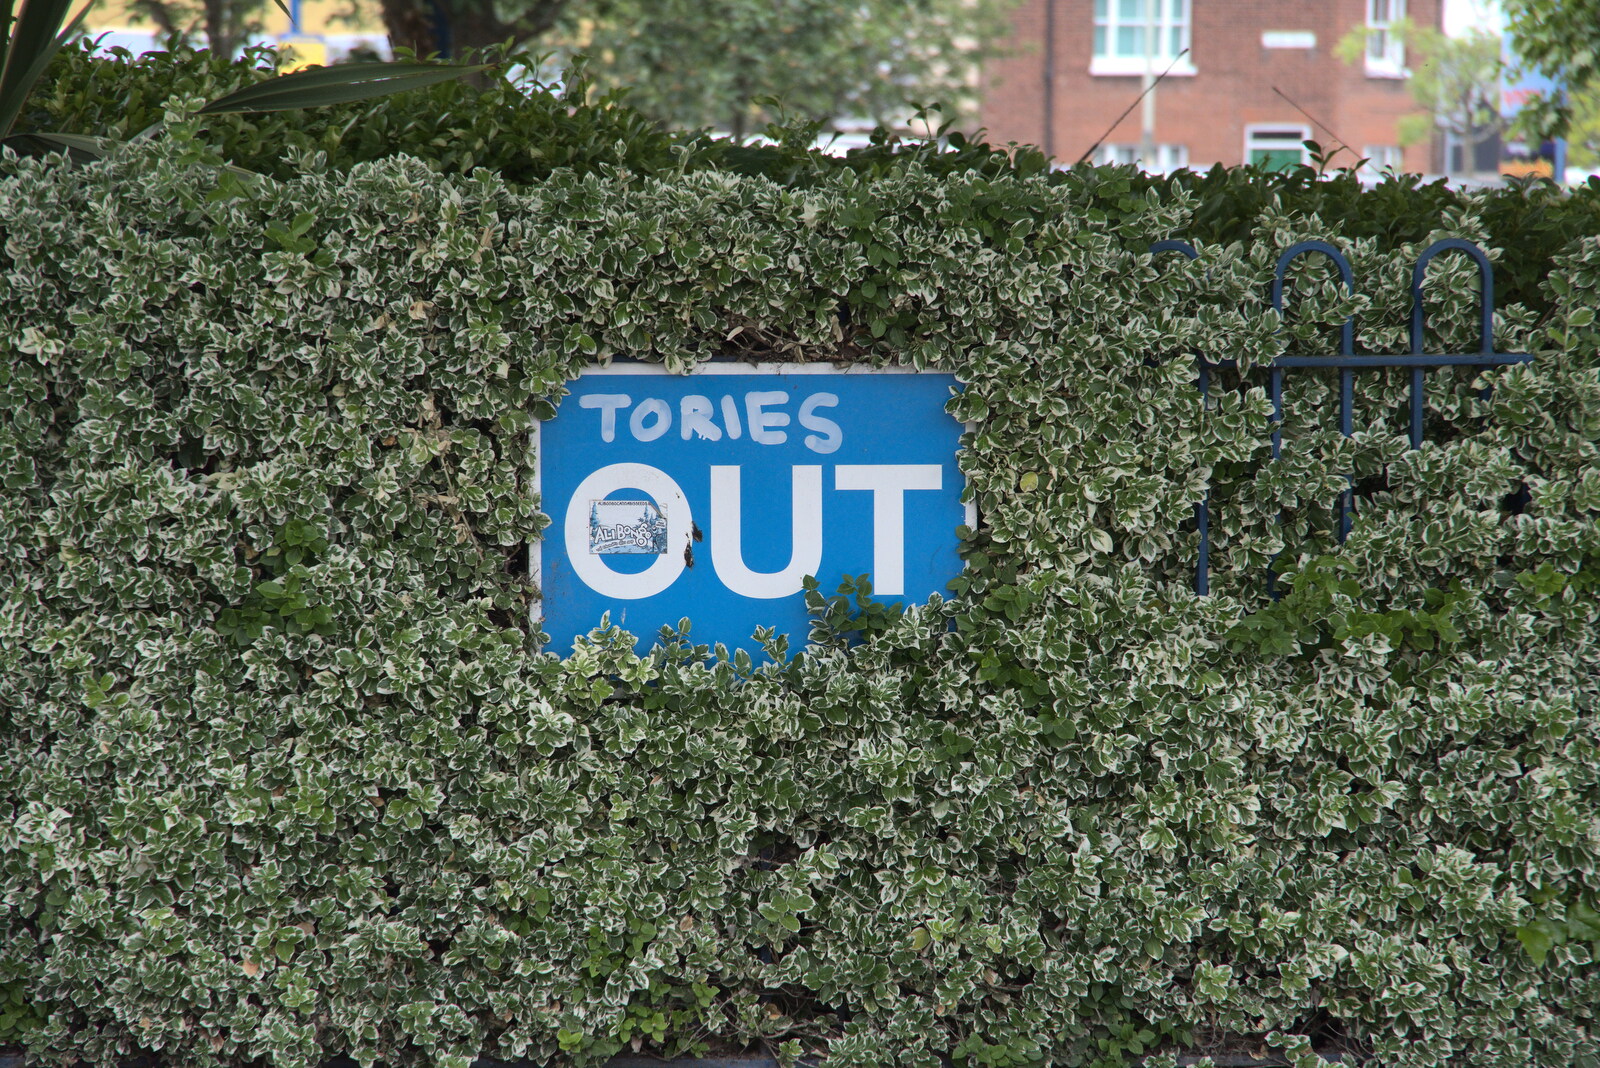 An amusing alteration to a car park 'out' sign from Discovering the Hidden City: Norwich, Norfolk - 23rd May 2022